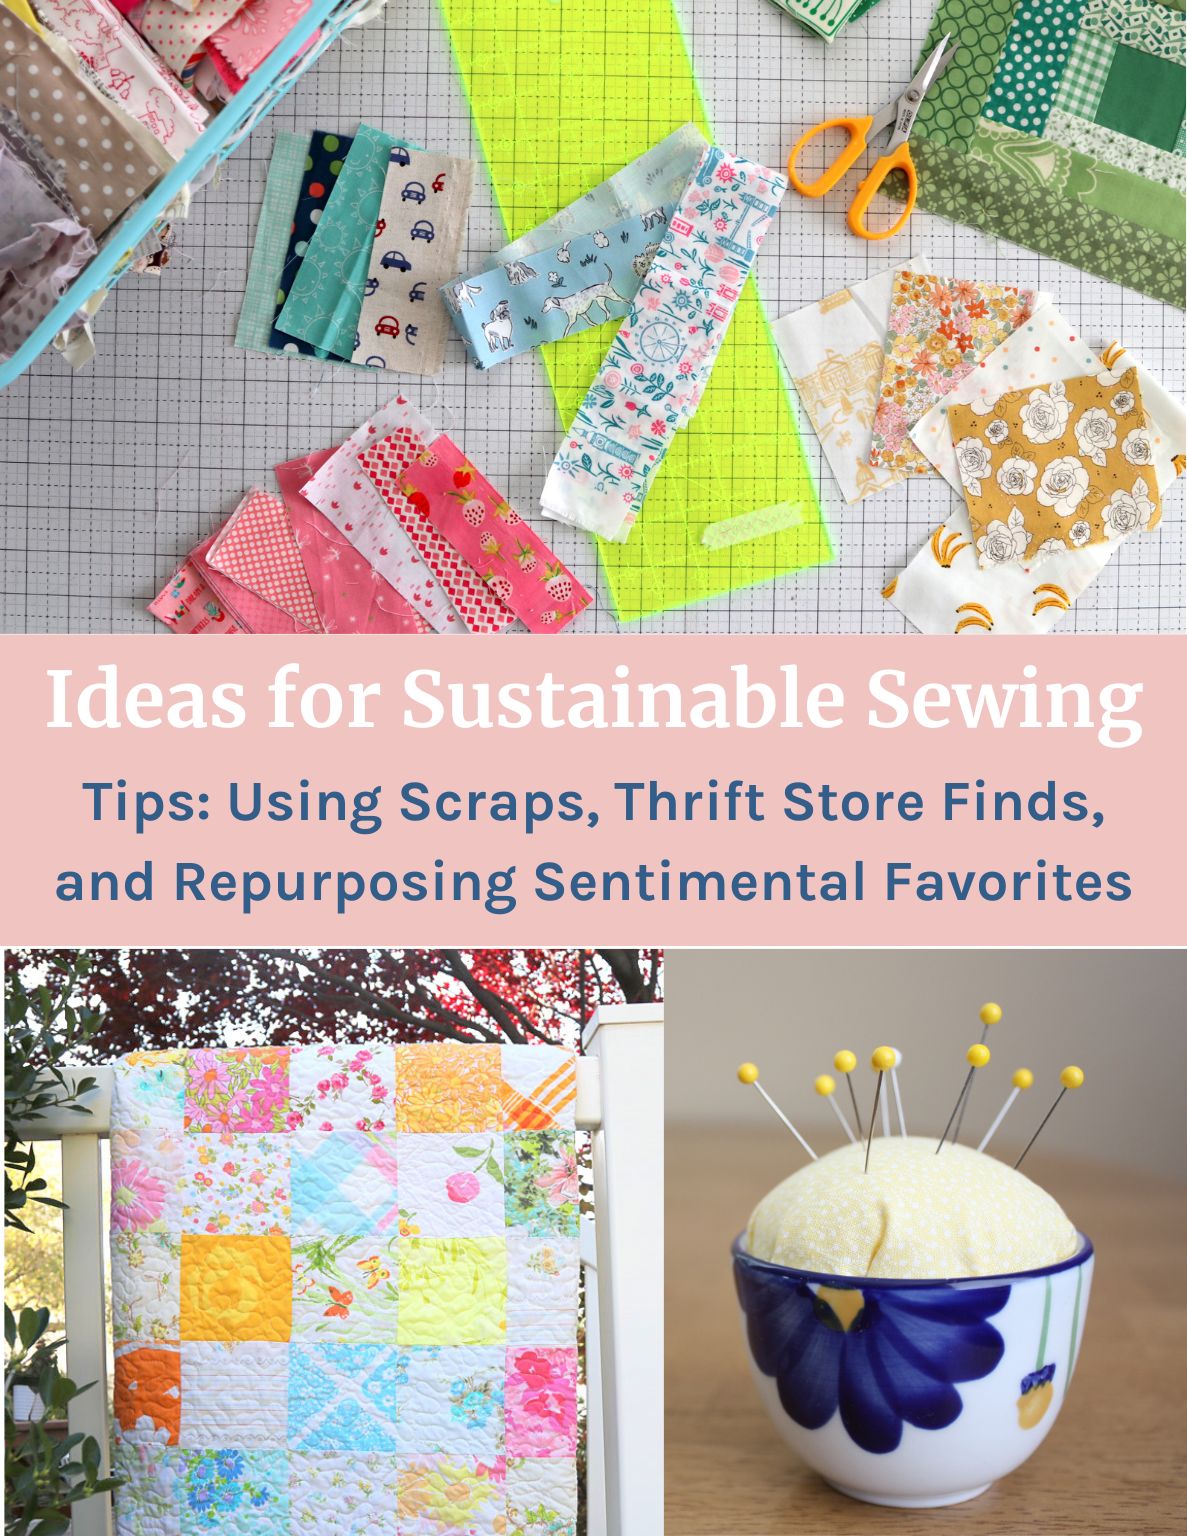 Ideas for using scraps, Repurpose and Reuse sewing notions